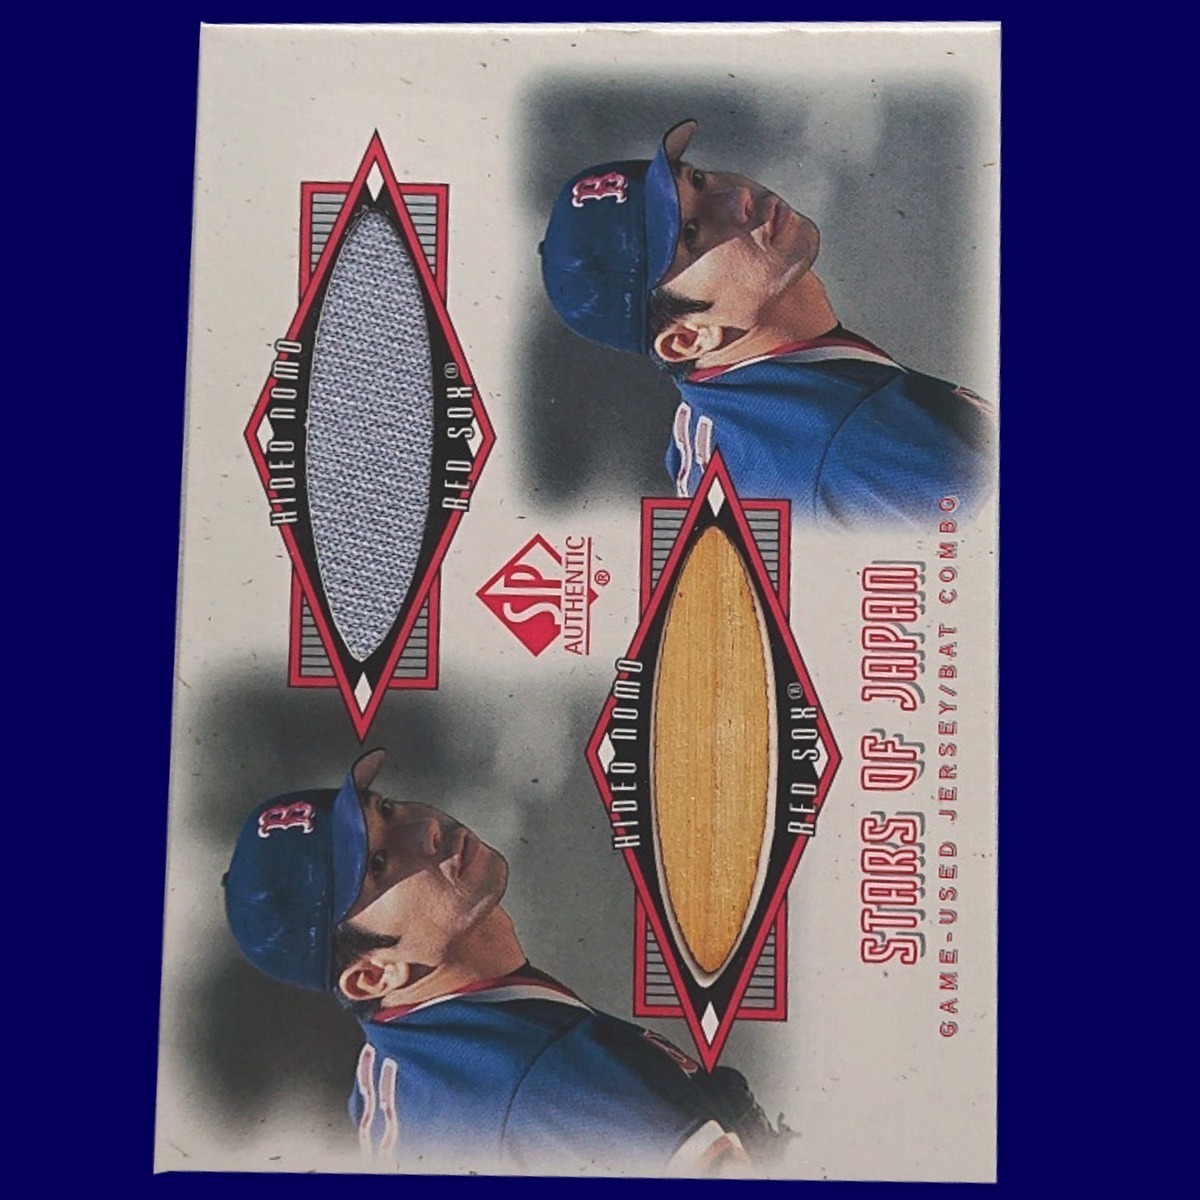 ◆H.Nomo #16【Jersey & Bat combo】UD Sp Authentic Stars of Japan Game-Used Jersey / Bat Combo　◇検索：野茂英雄 ジャージ バット